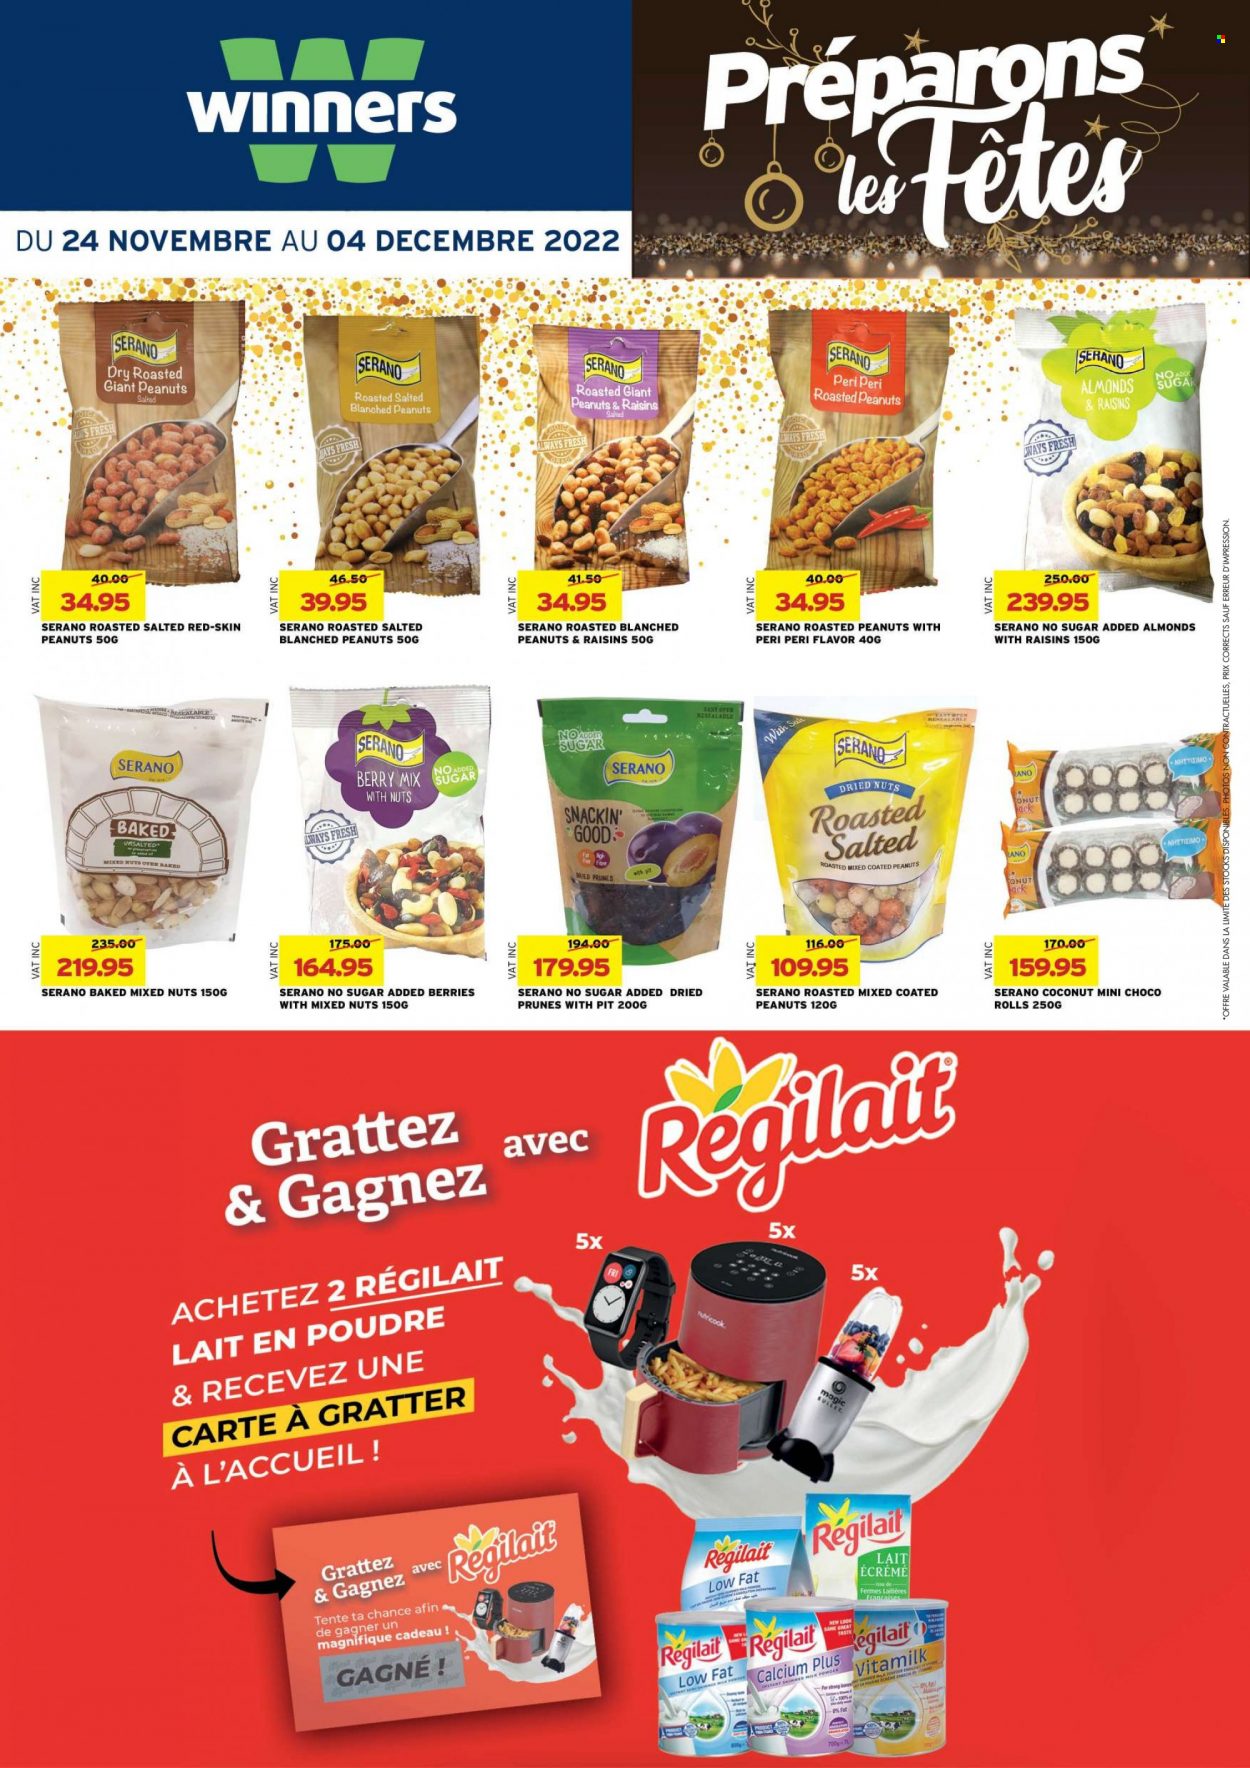 thumbnail - Winner's Catalogue - 24.11.2022 - 4.12.2022 - Sales products - coconut, milk, milk powder, almonds, roasted peanuts, prunes, dried fruit, mixed nuts, calcium. Page 22.